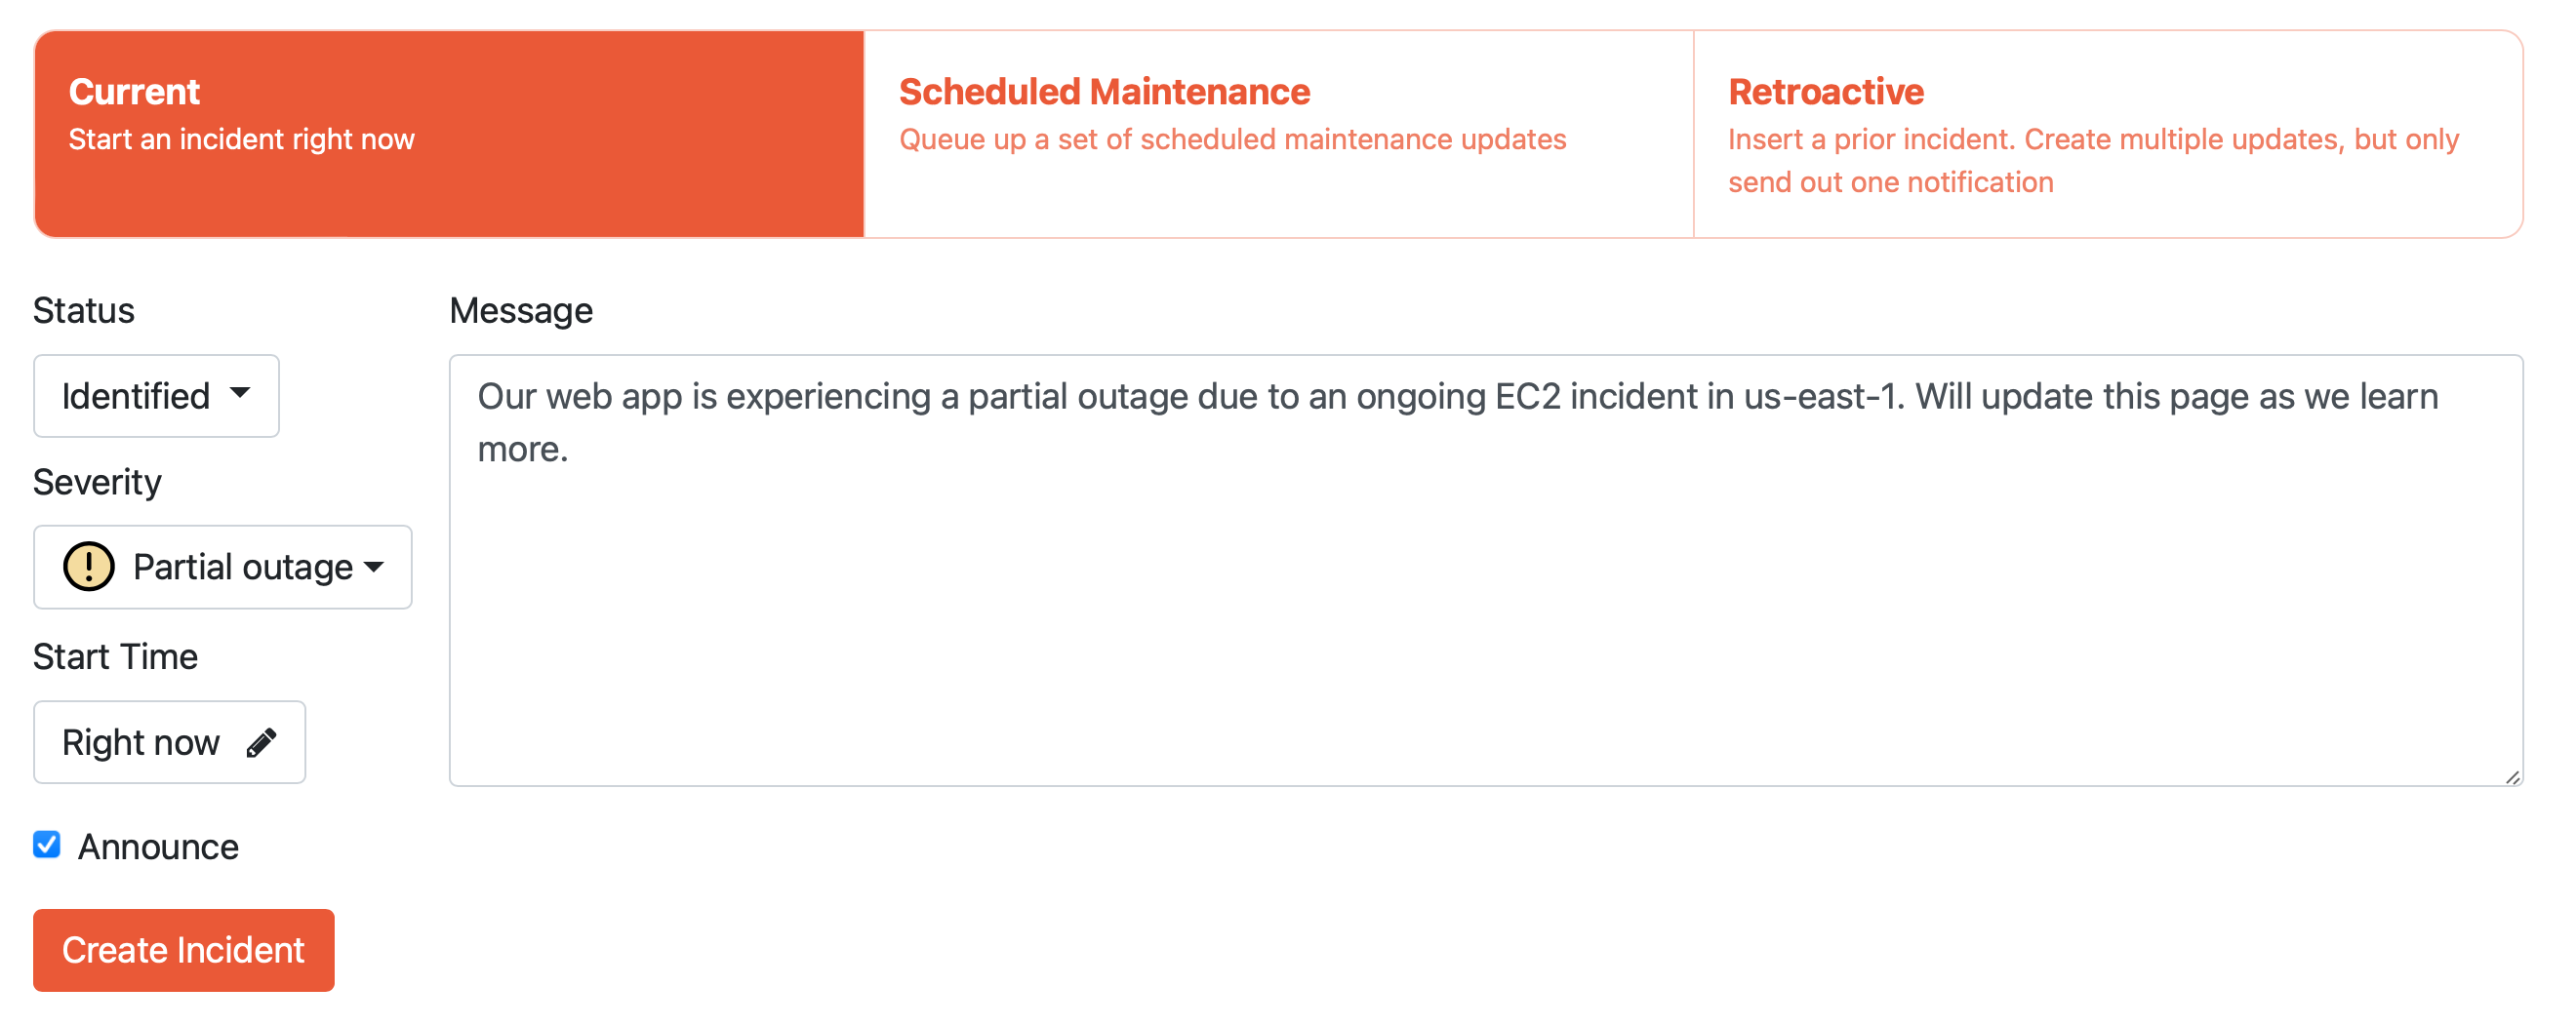 Our web app is experiencing a partial outage due to an ongoing EC2 incident in us-east-1. Will update this page as we learn more.